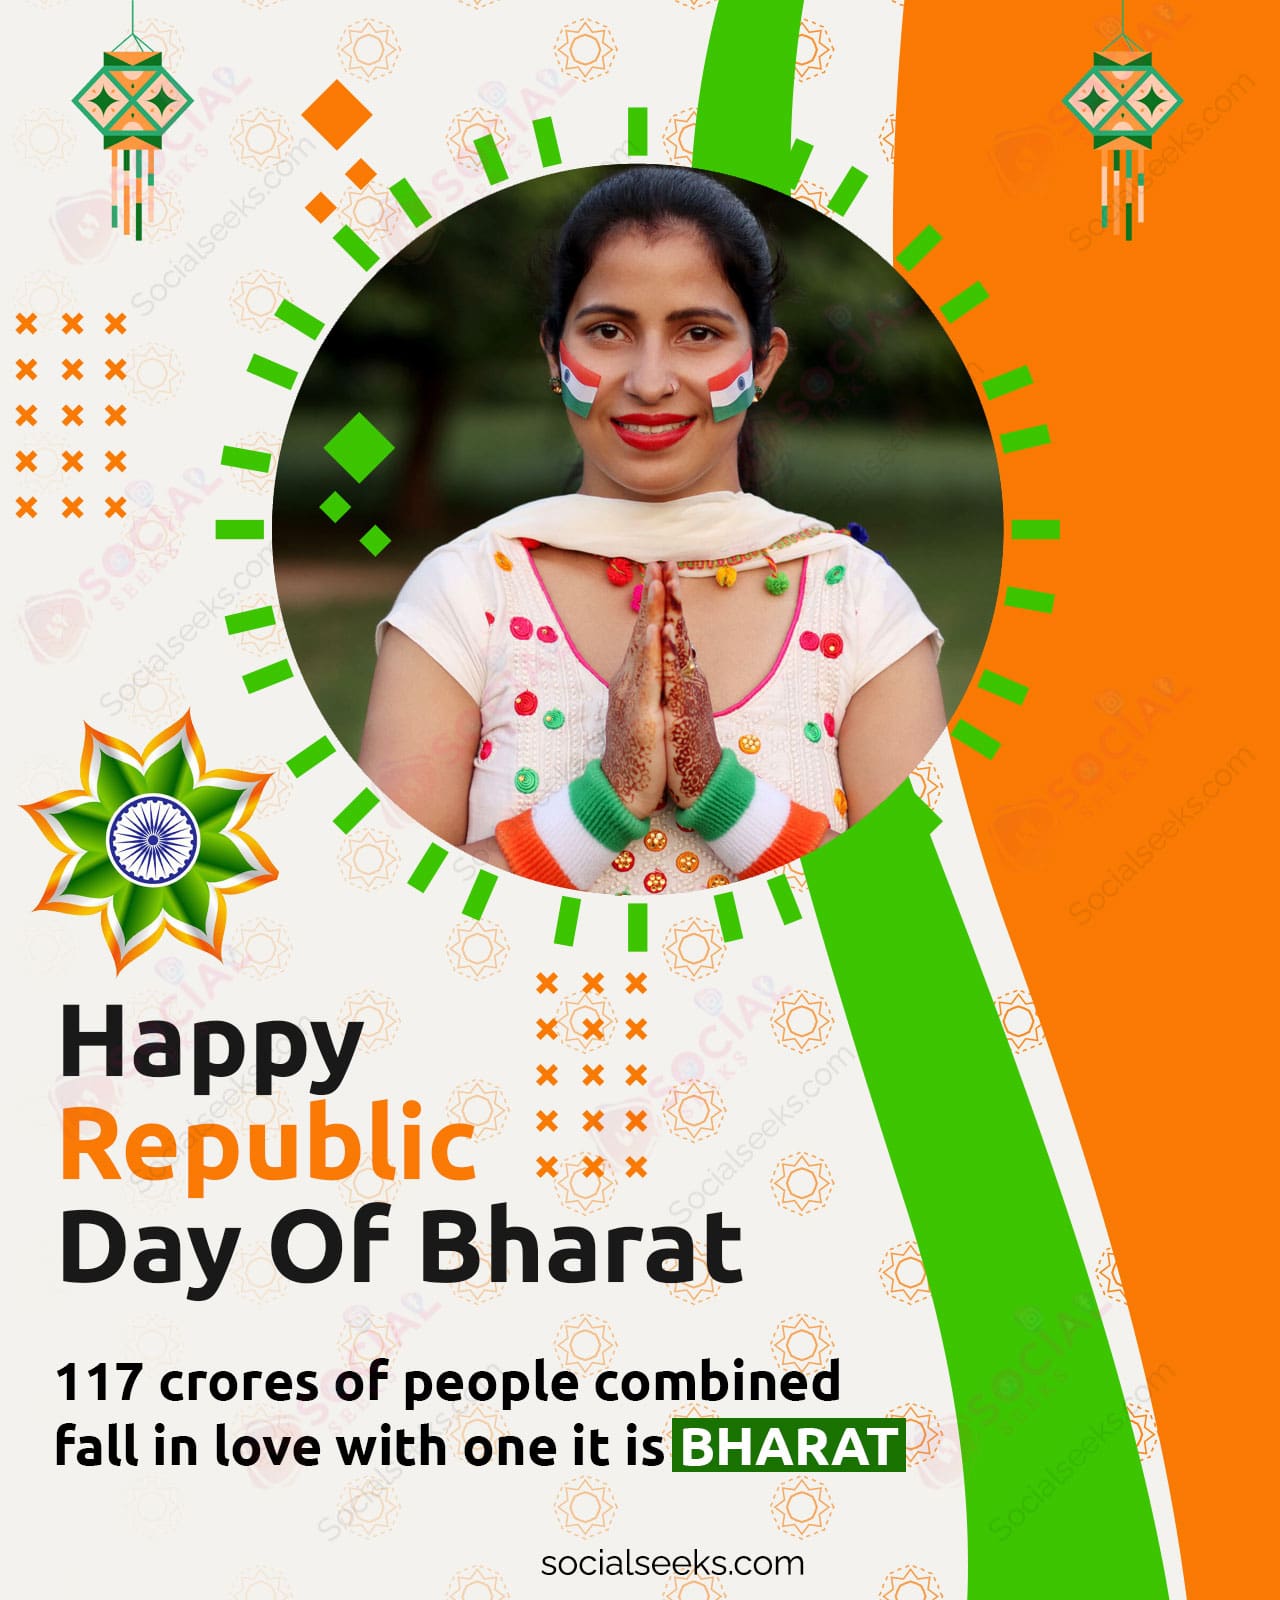 Personalize Happy Republic Day Of Bharat Photo Frame